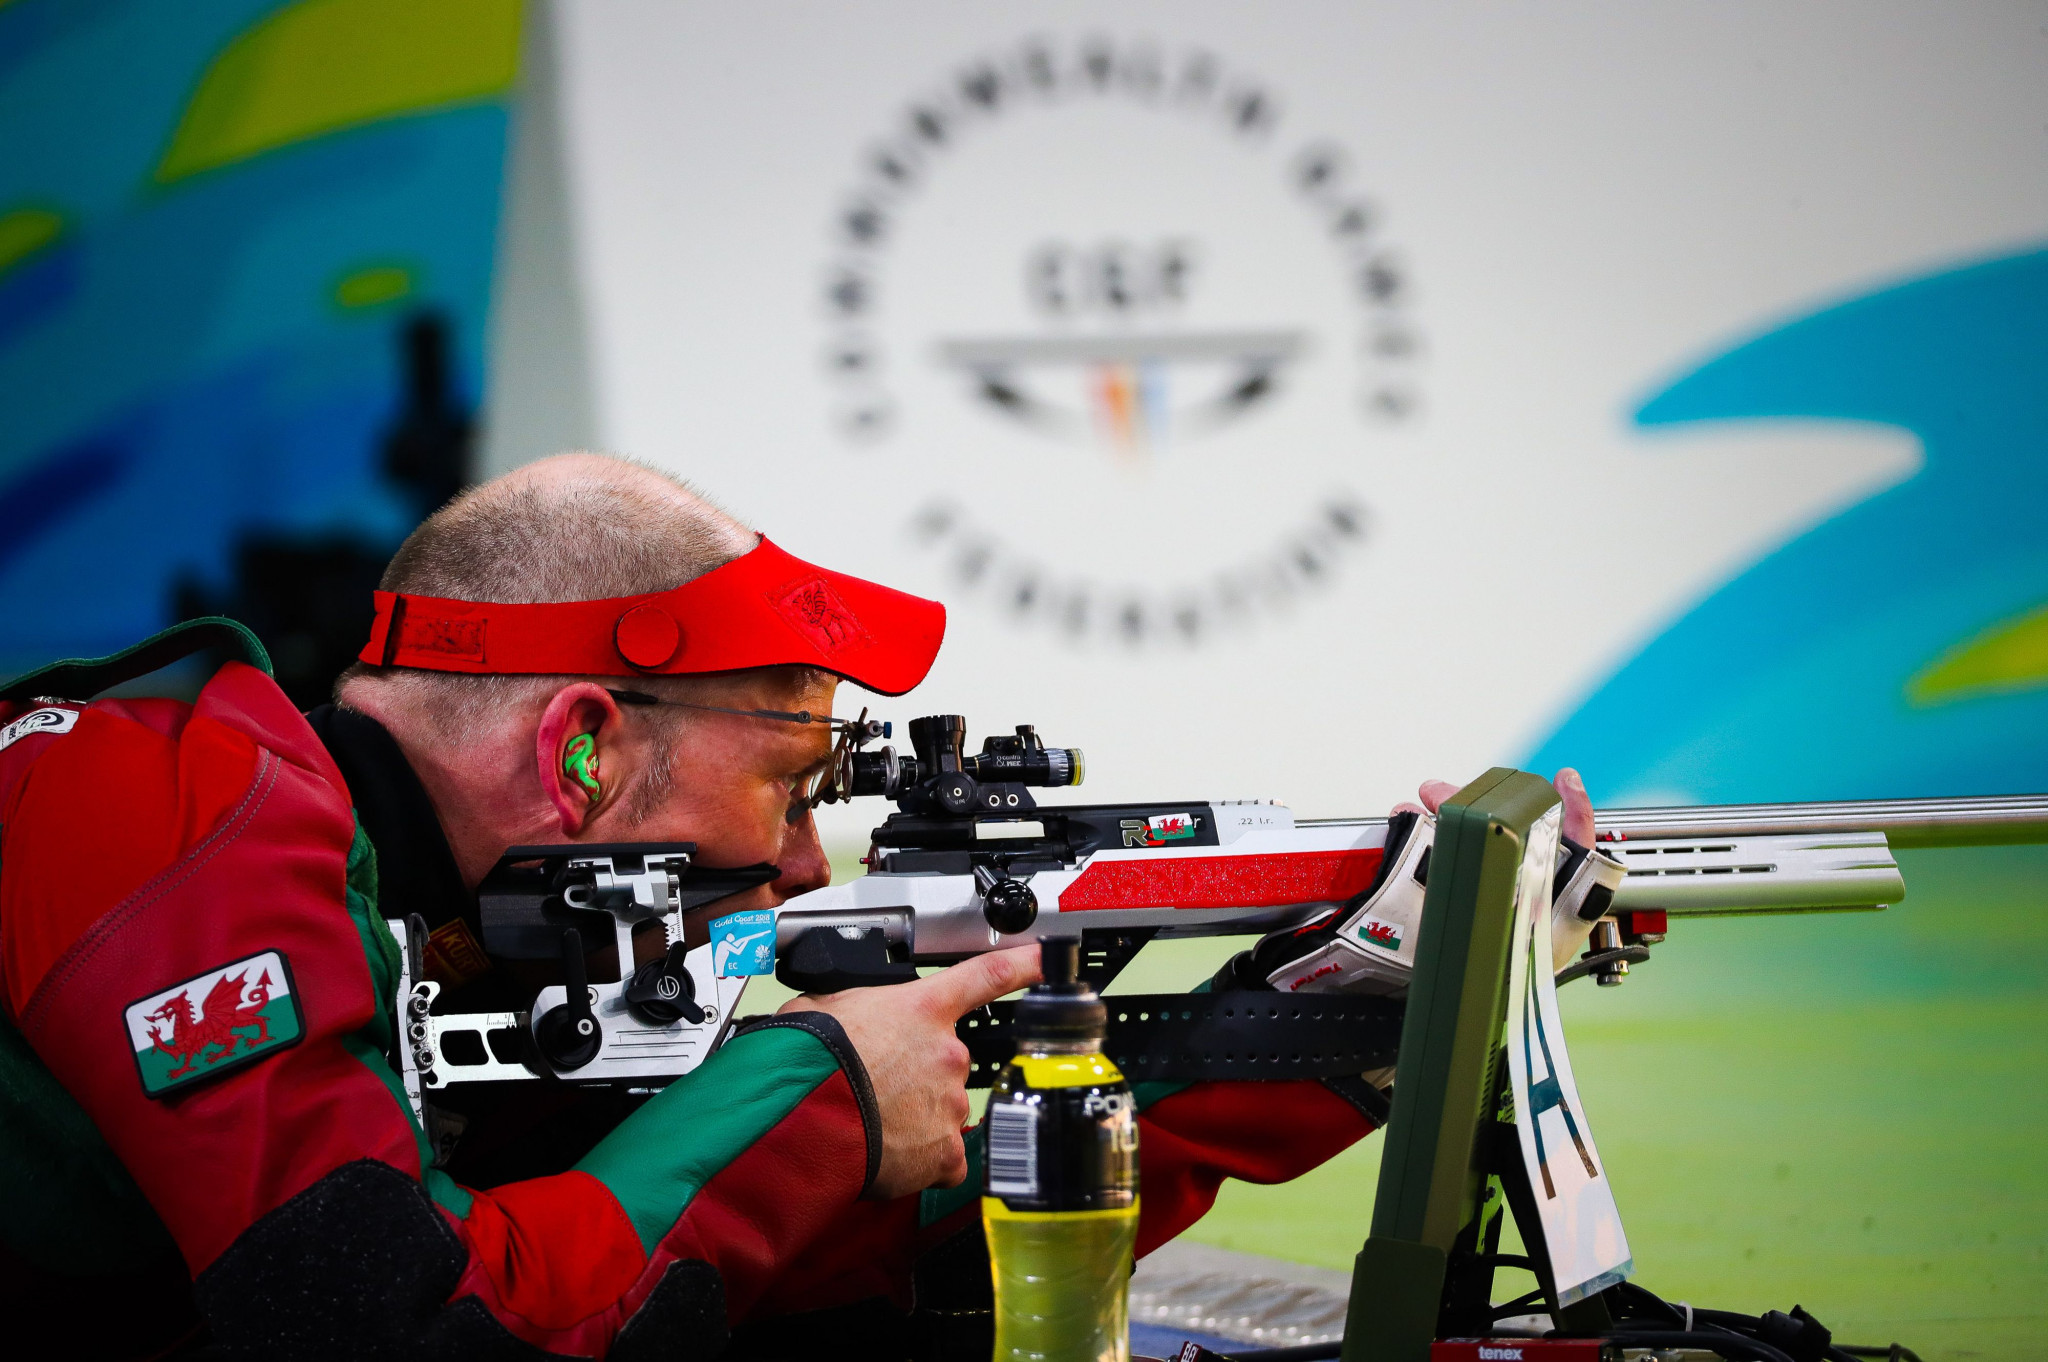 Birthday boy Phelps claims men's 50m rifle prone title with Commonwealth Games record